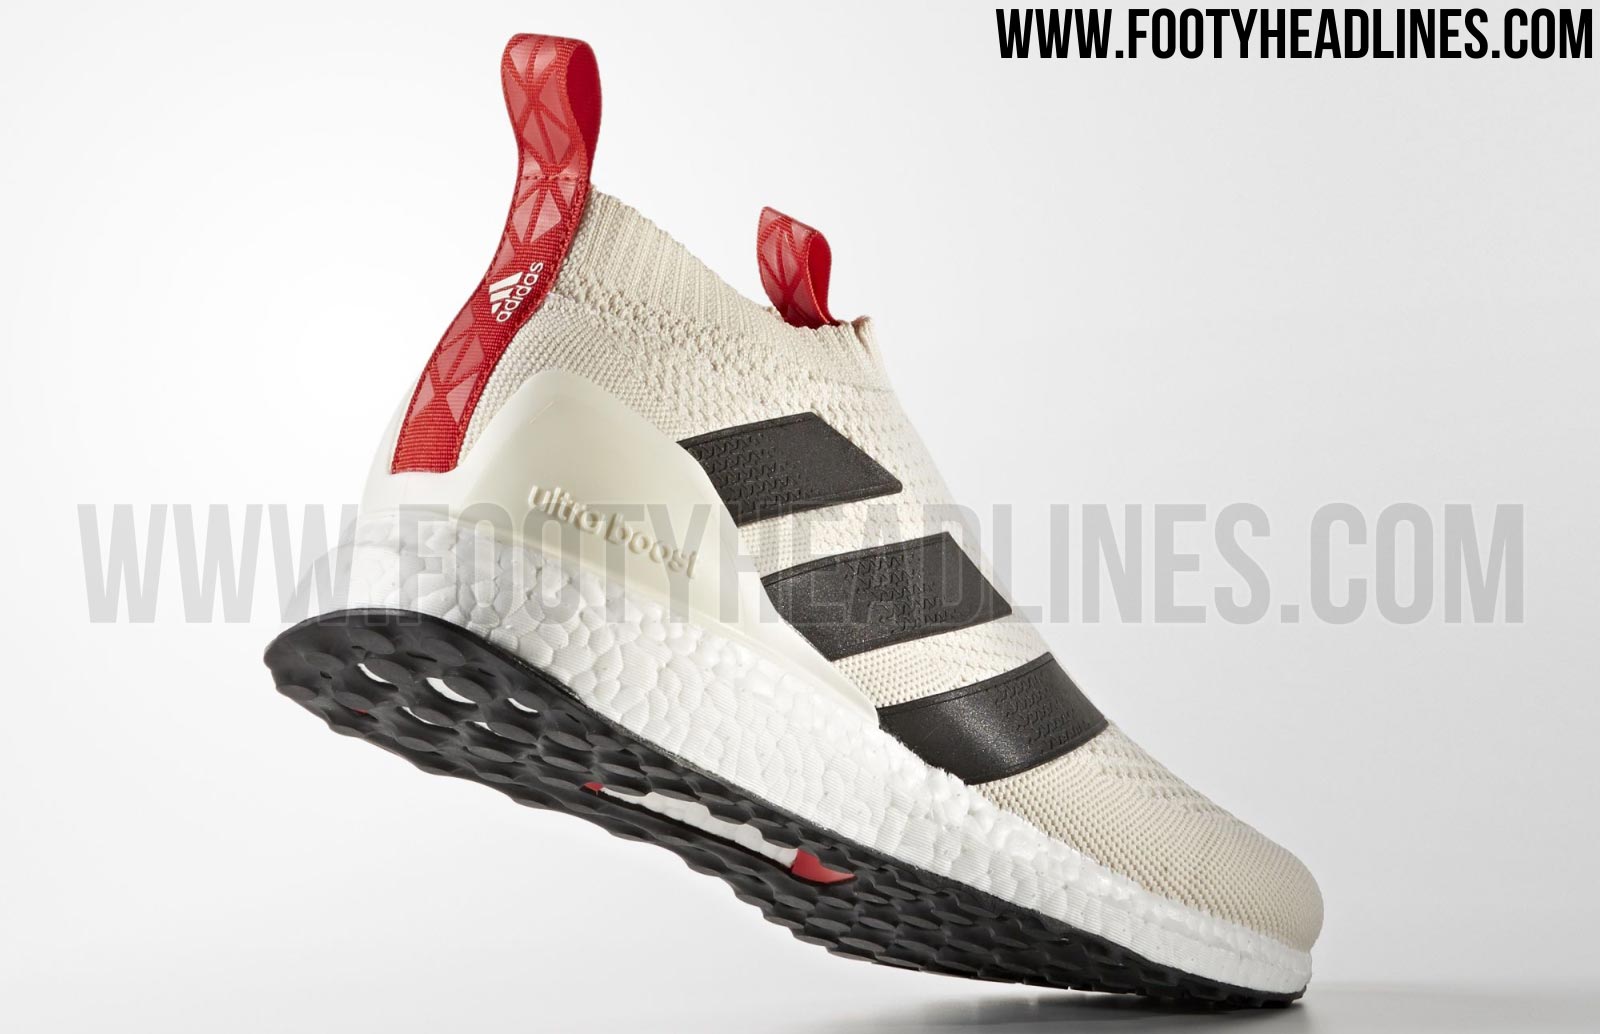 Limited-Edition Predator-Inspired Ace PureControl Ultra Boost Champagne Boots Leaked - Footy Headlines